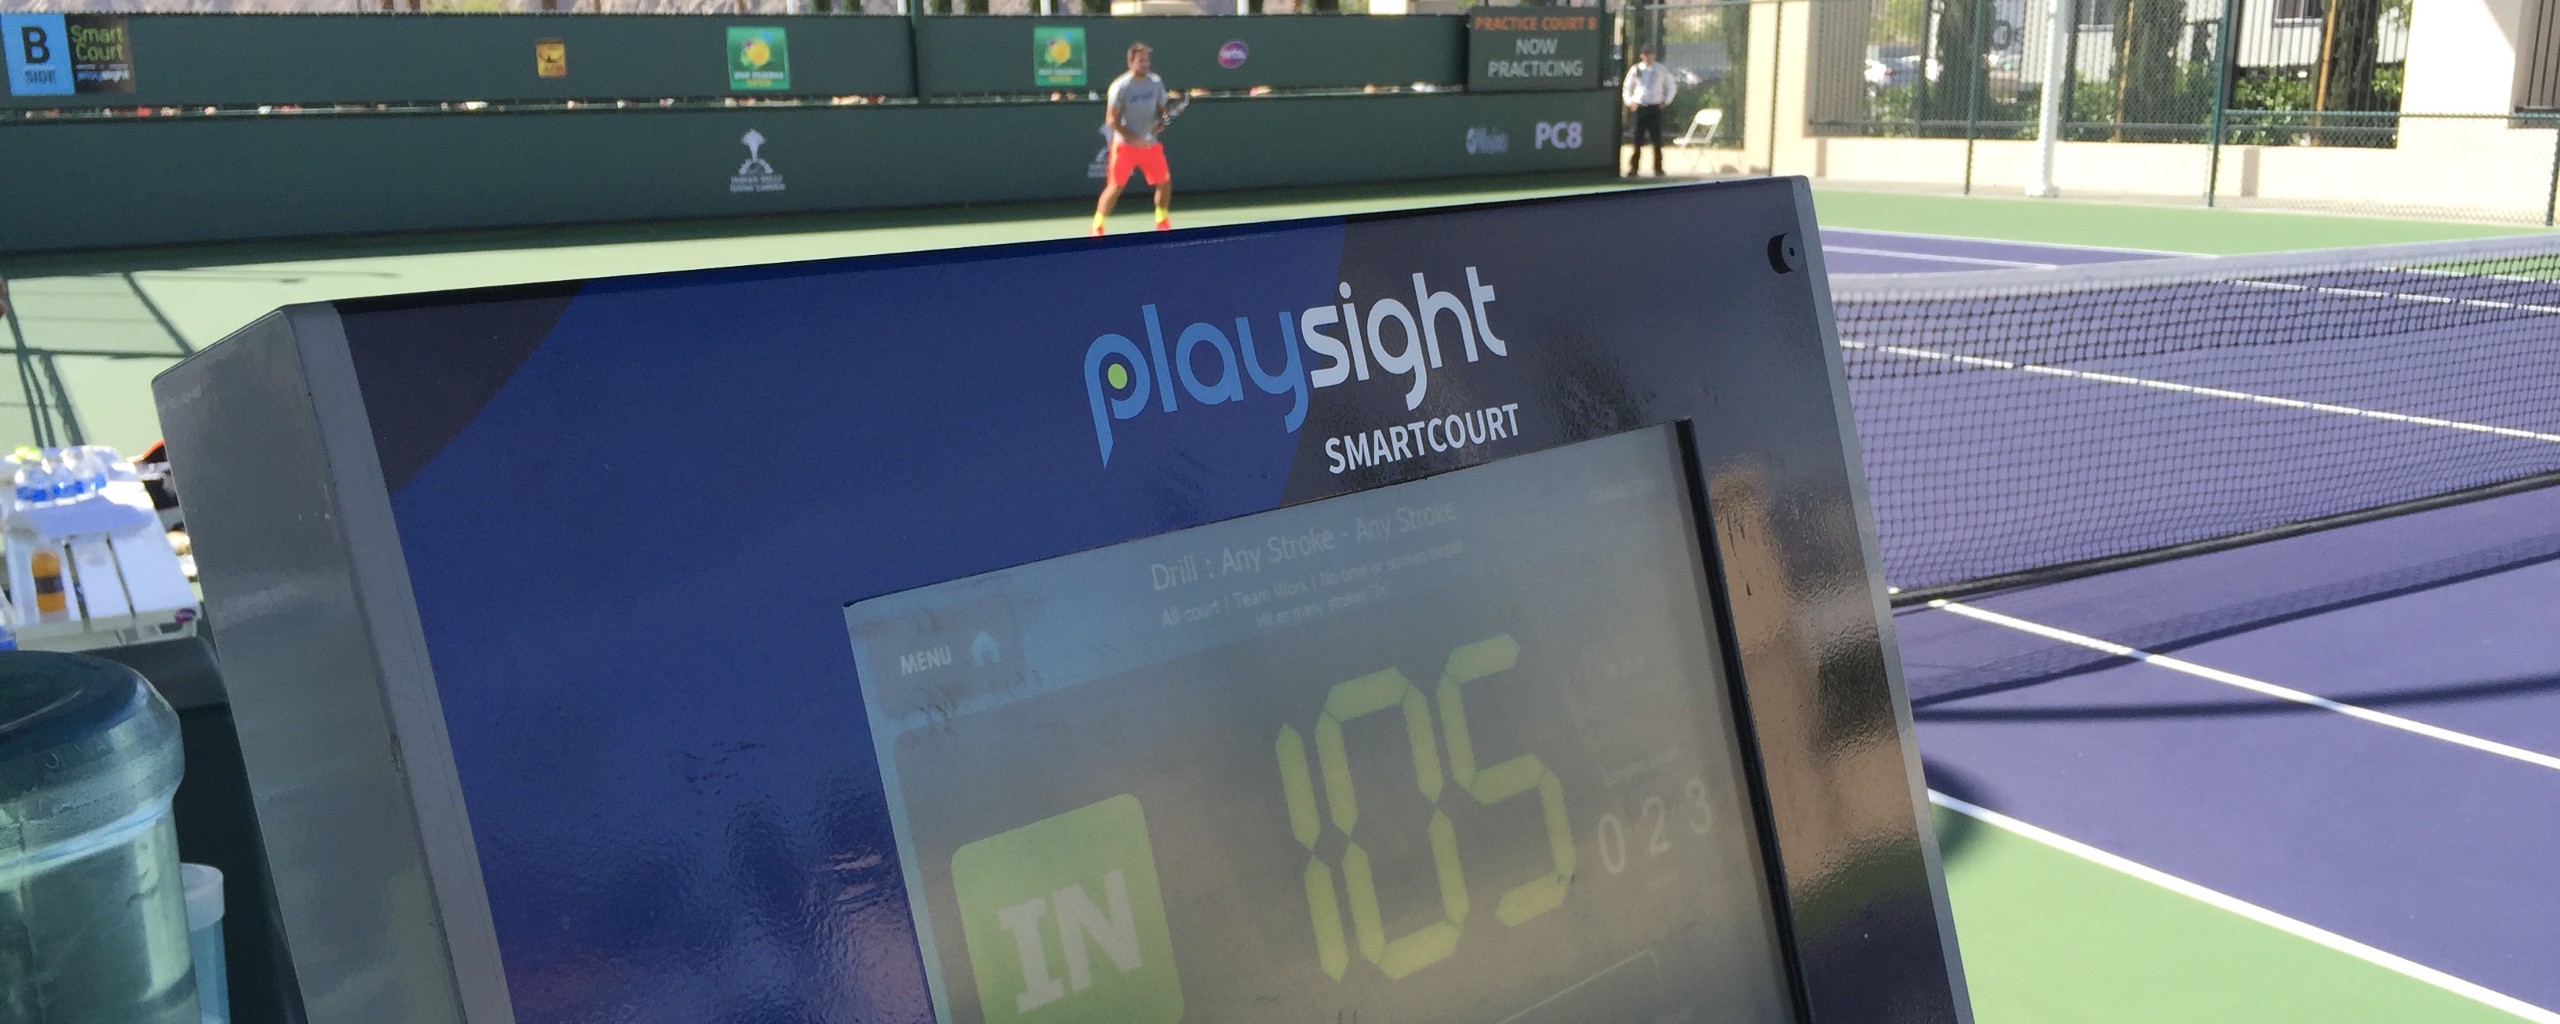 A computer monitor on a tennis court